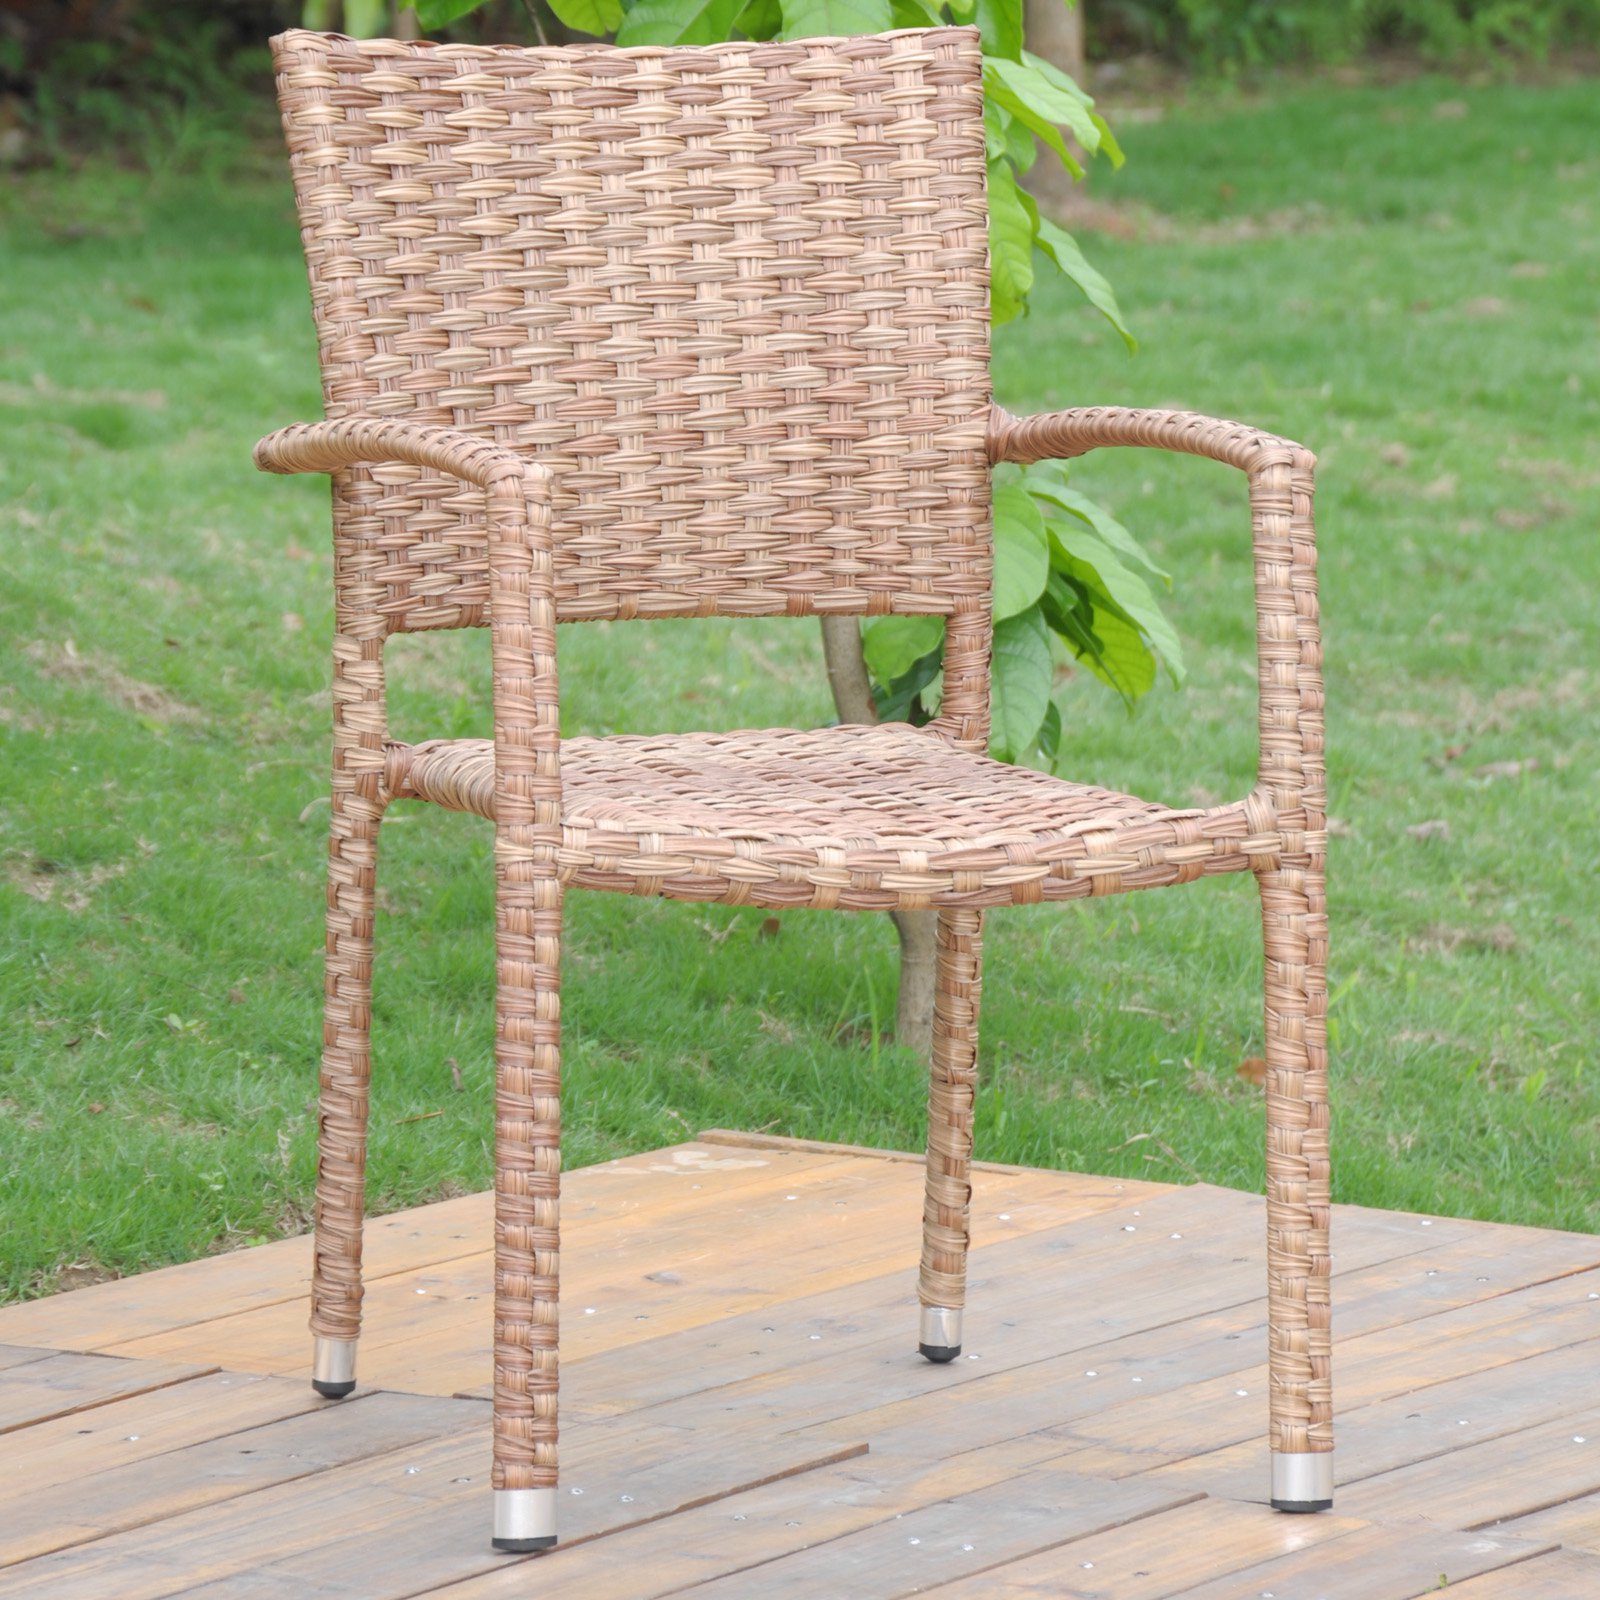 Ibiza Resin Wicker Aluminum Dining Chair (Set of 4) - image 1 of 2